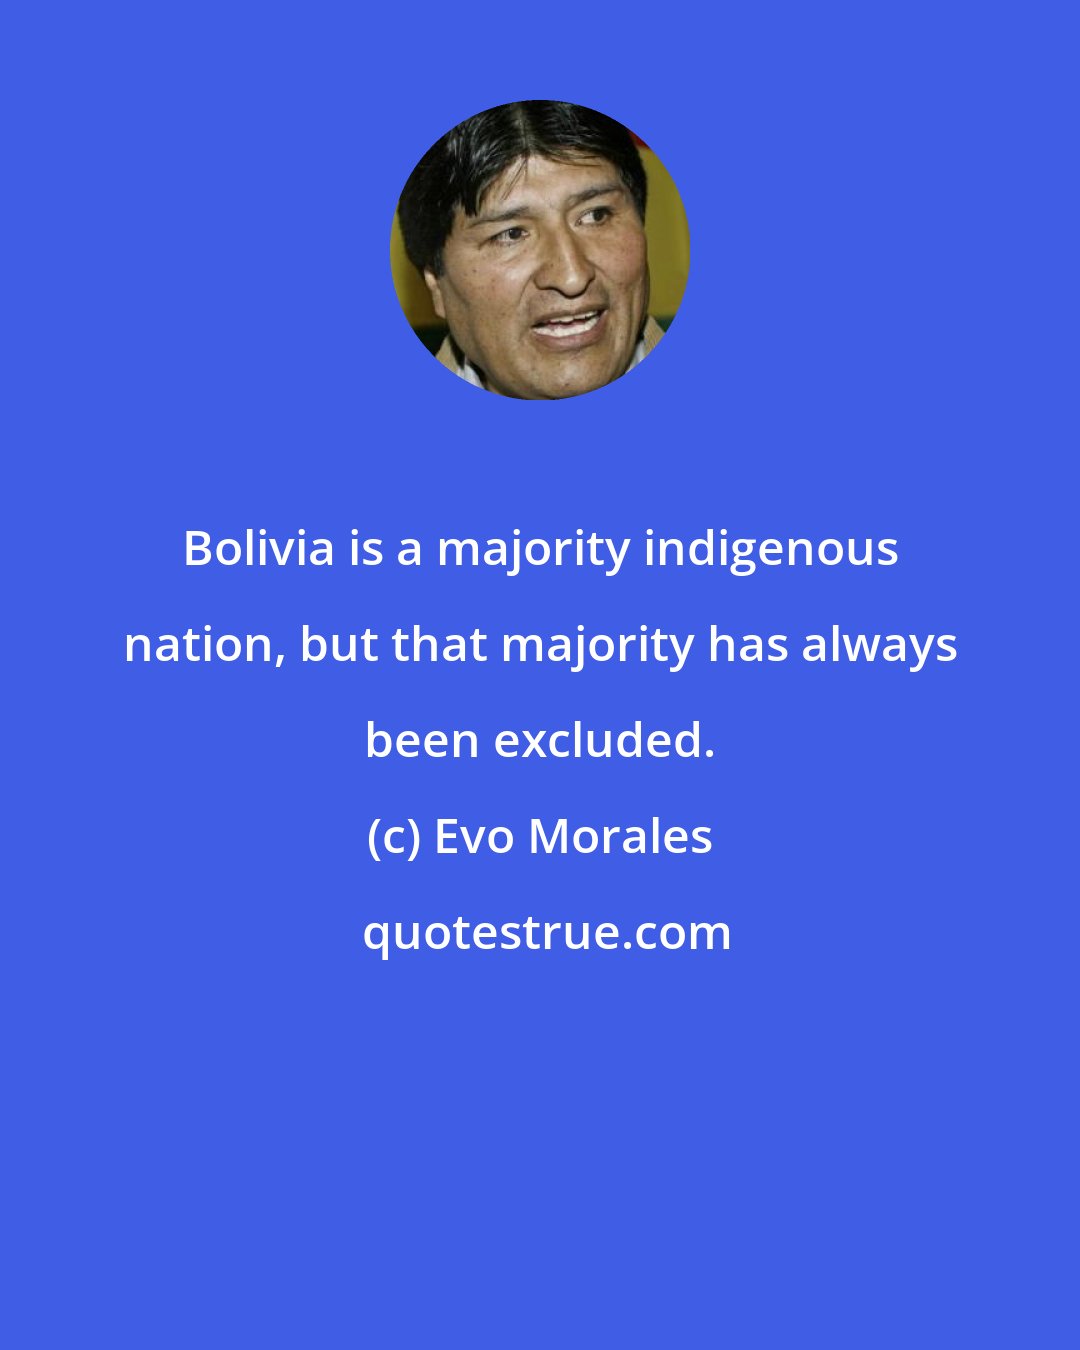 Evo Morales: Bolivia is a majority indigenous nation, but that majority has always been excluded.